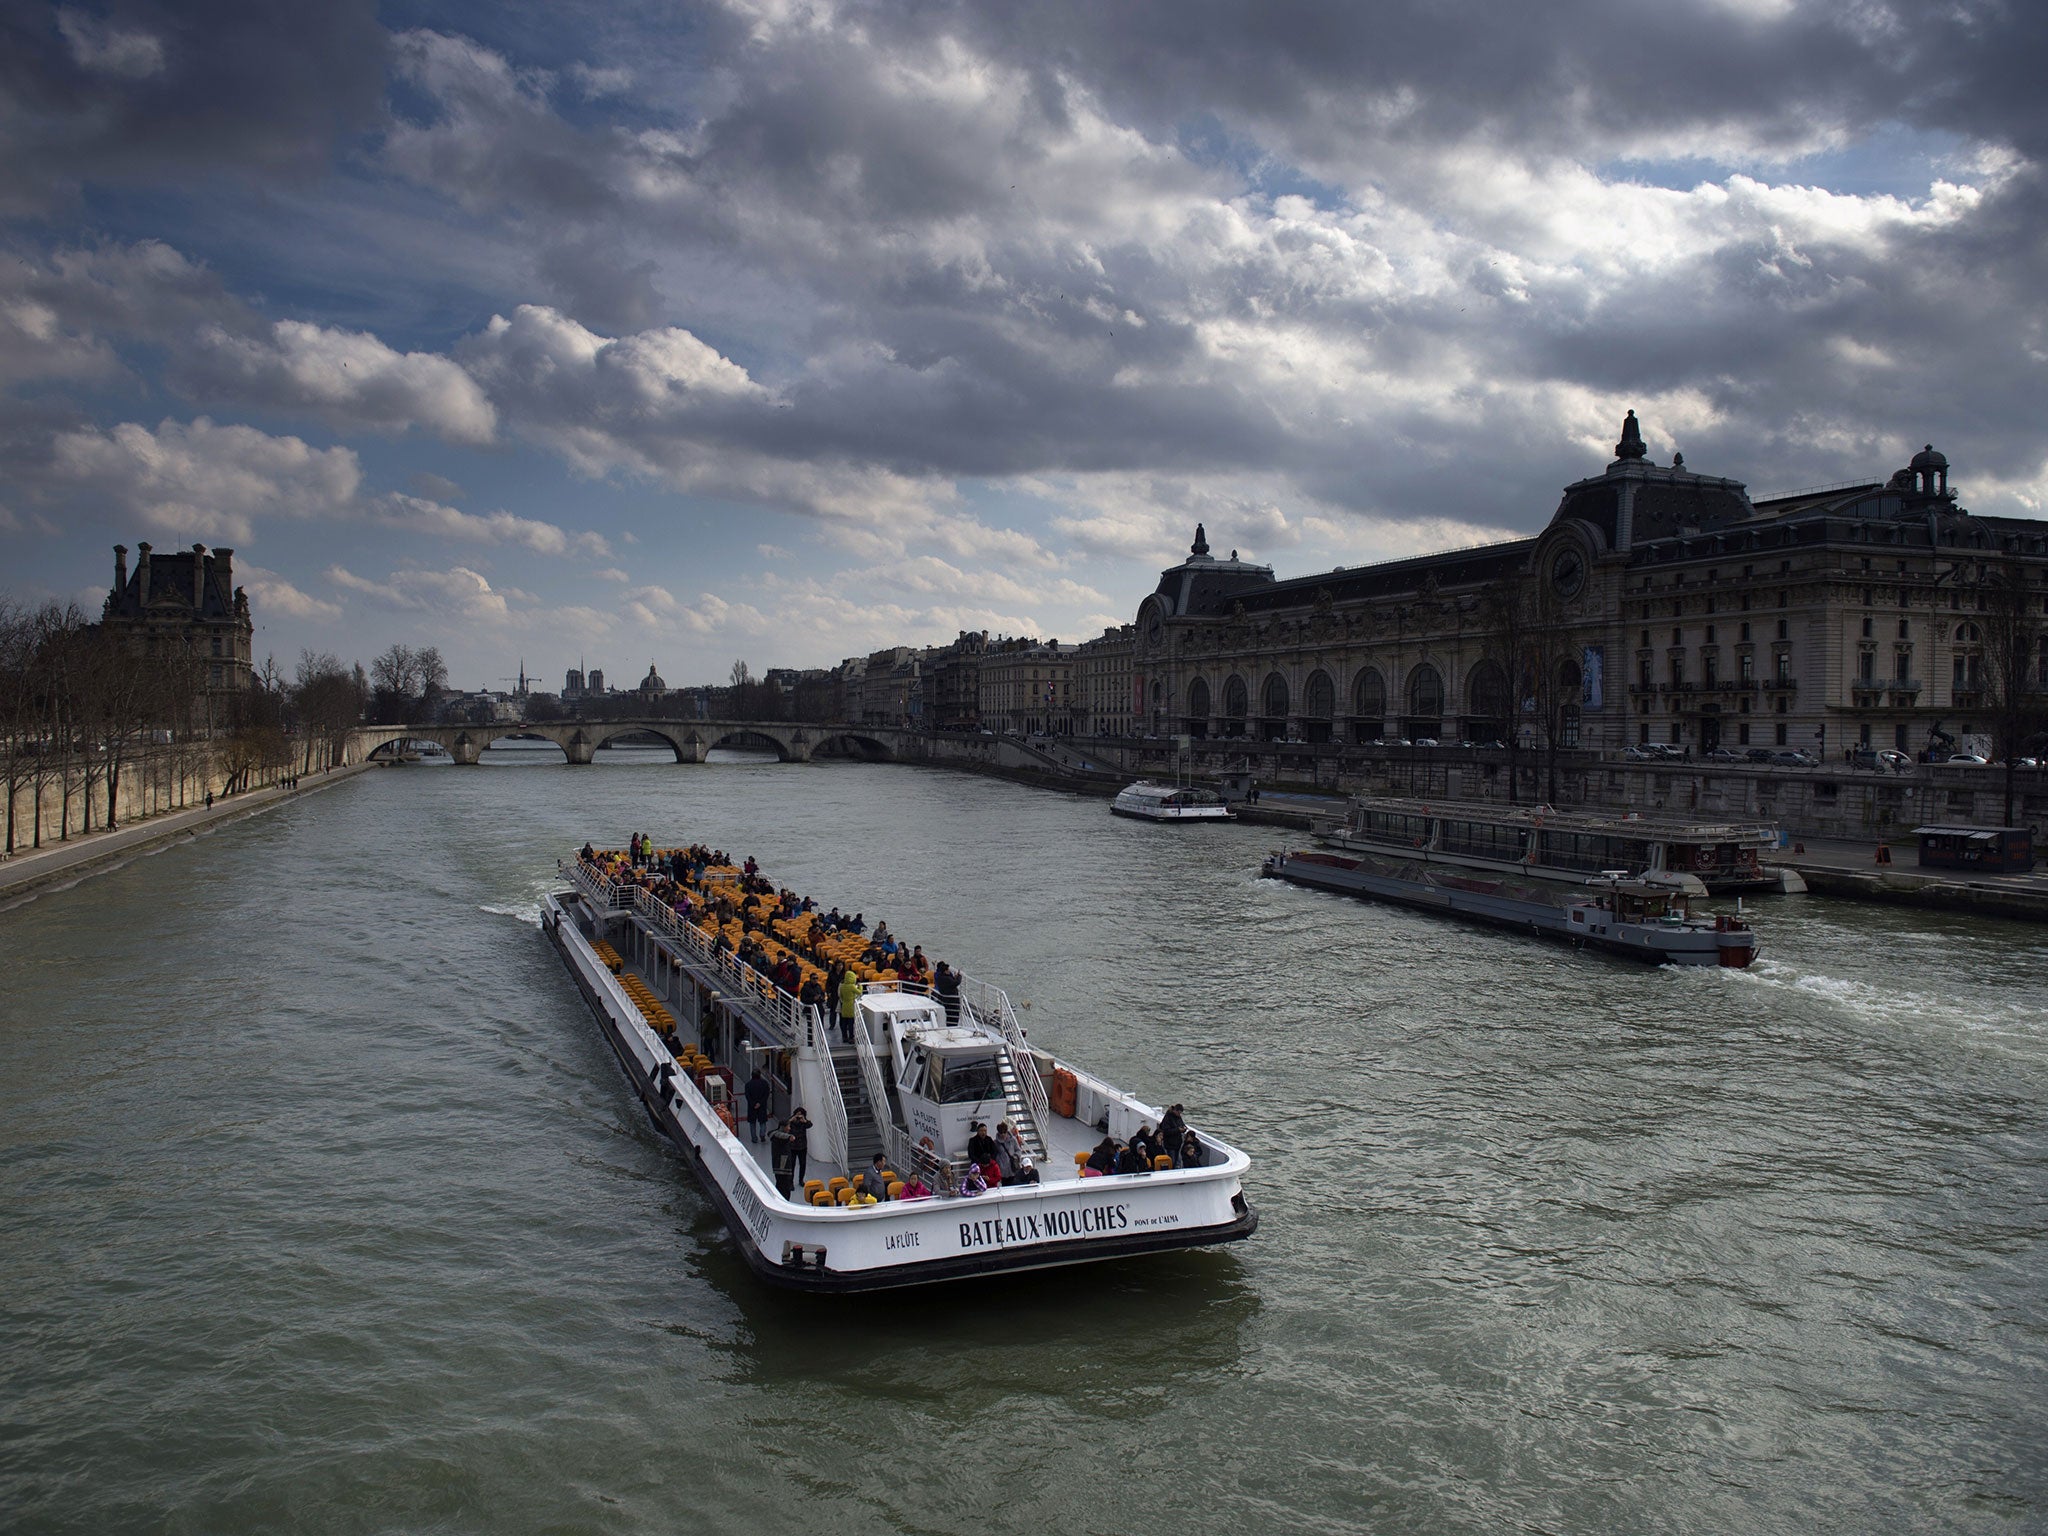 Bateaux-Mouches riverboats are a popular way to tour